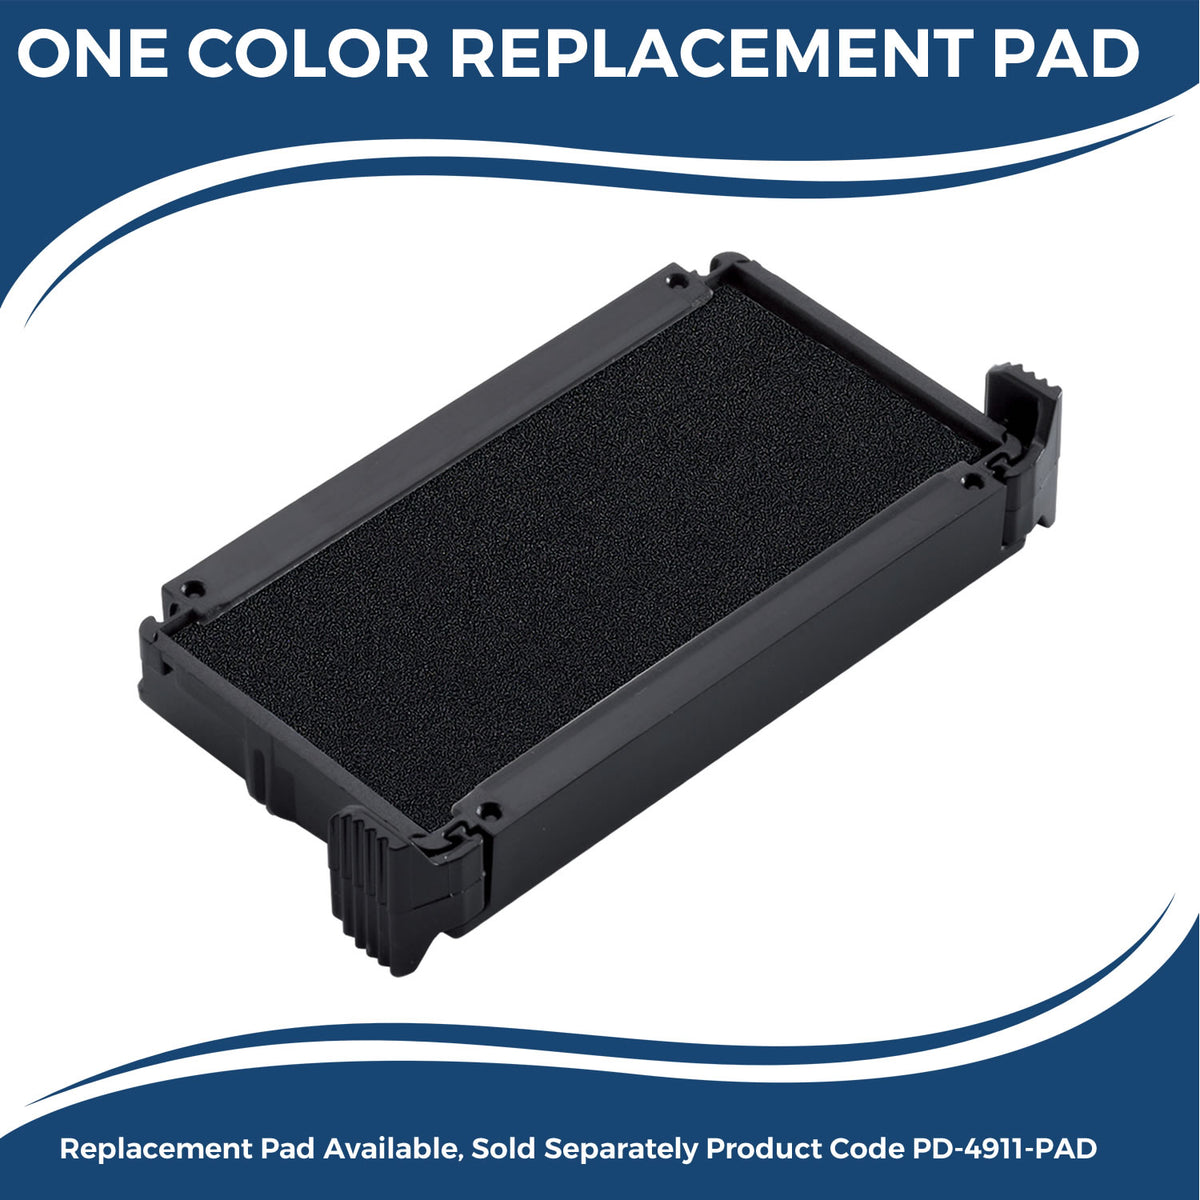 Self-Inking Bold Rough Draft Stamp 4838S Small Replacment Pad